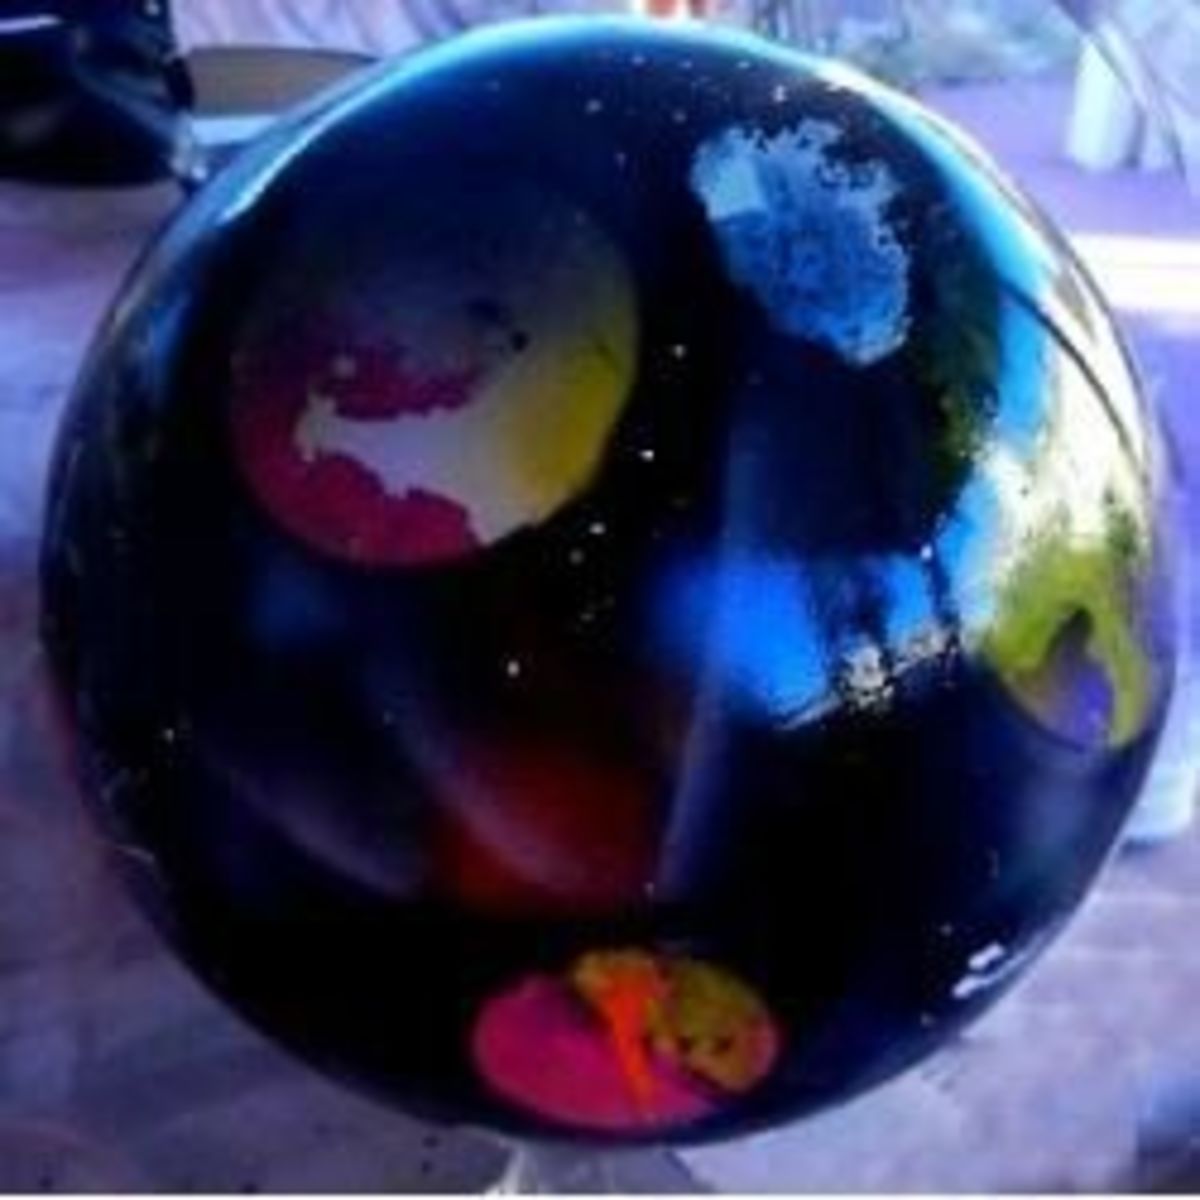 You can see the various sizes of planets I created on this gazing ball.